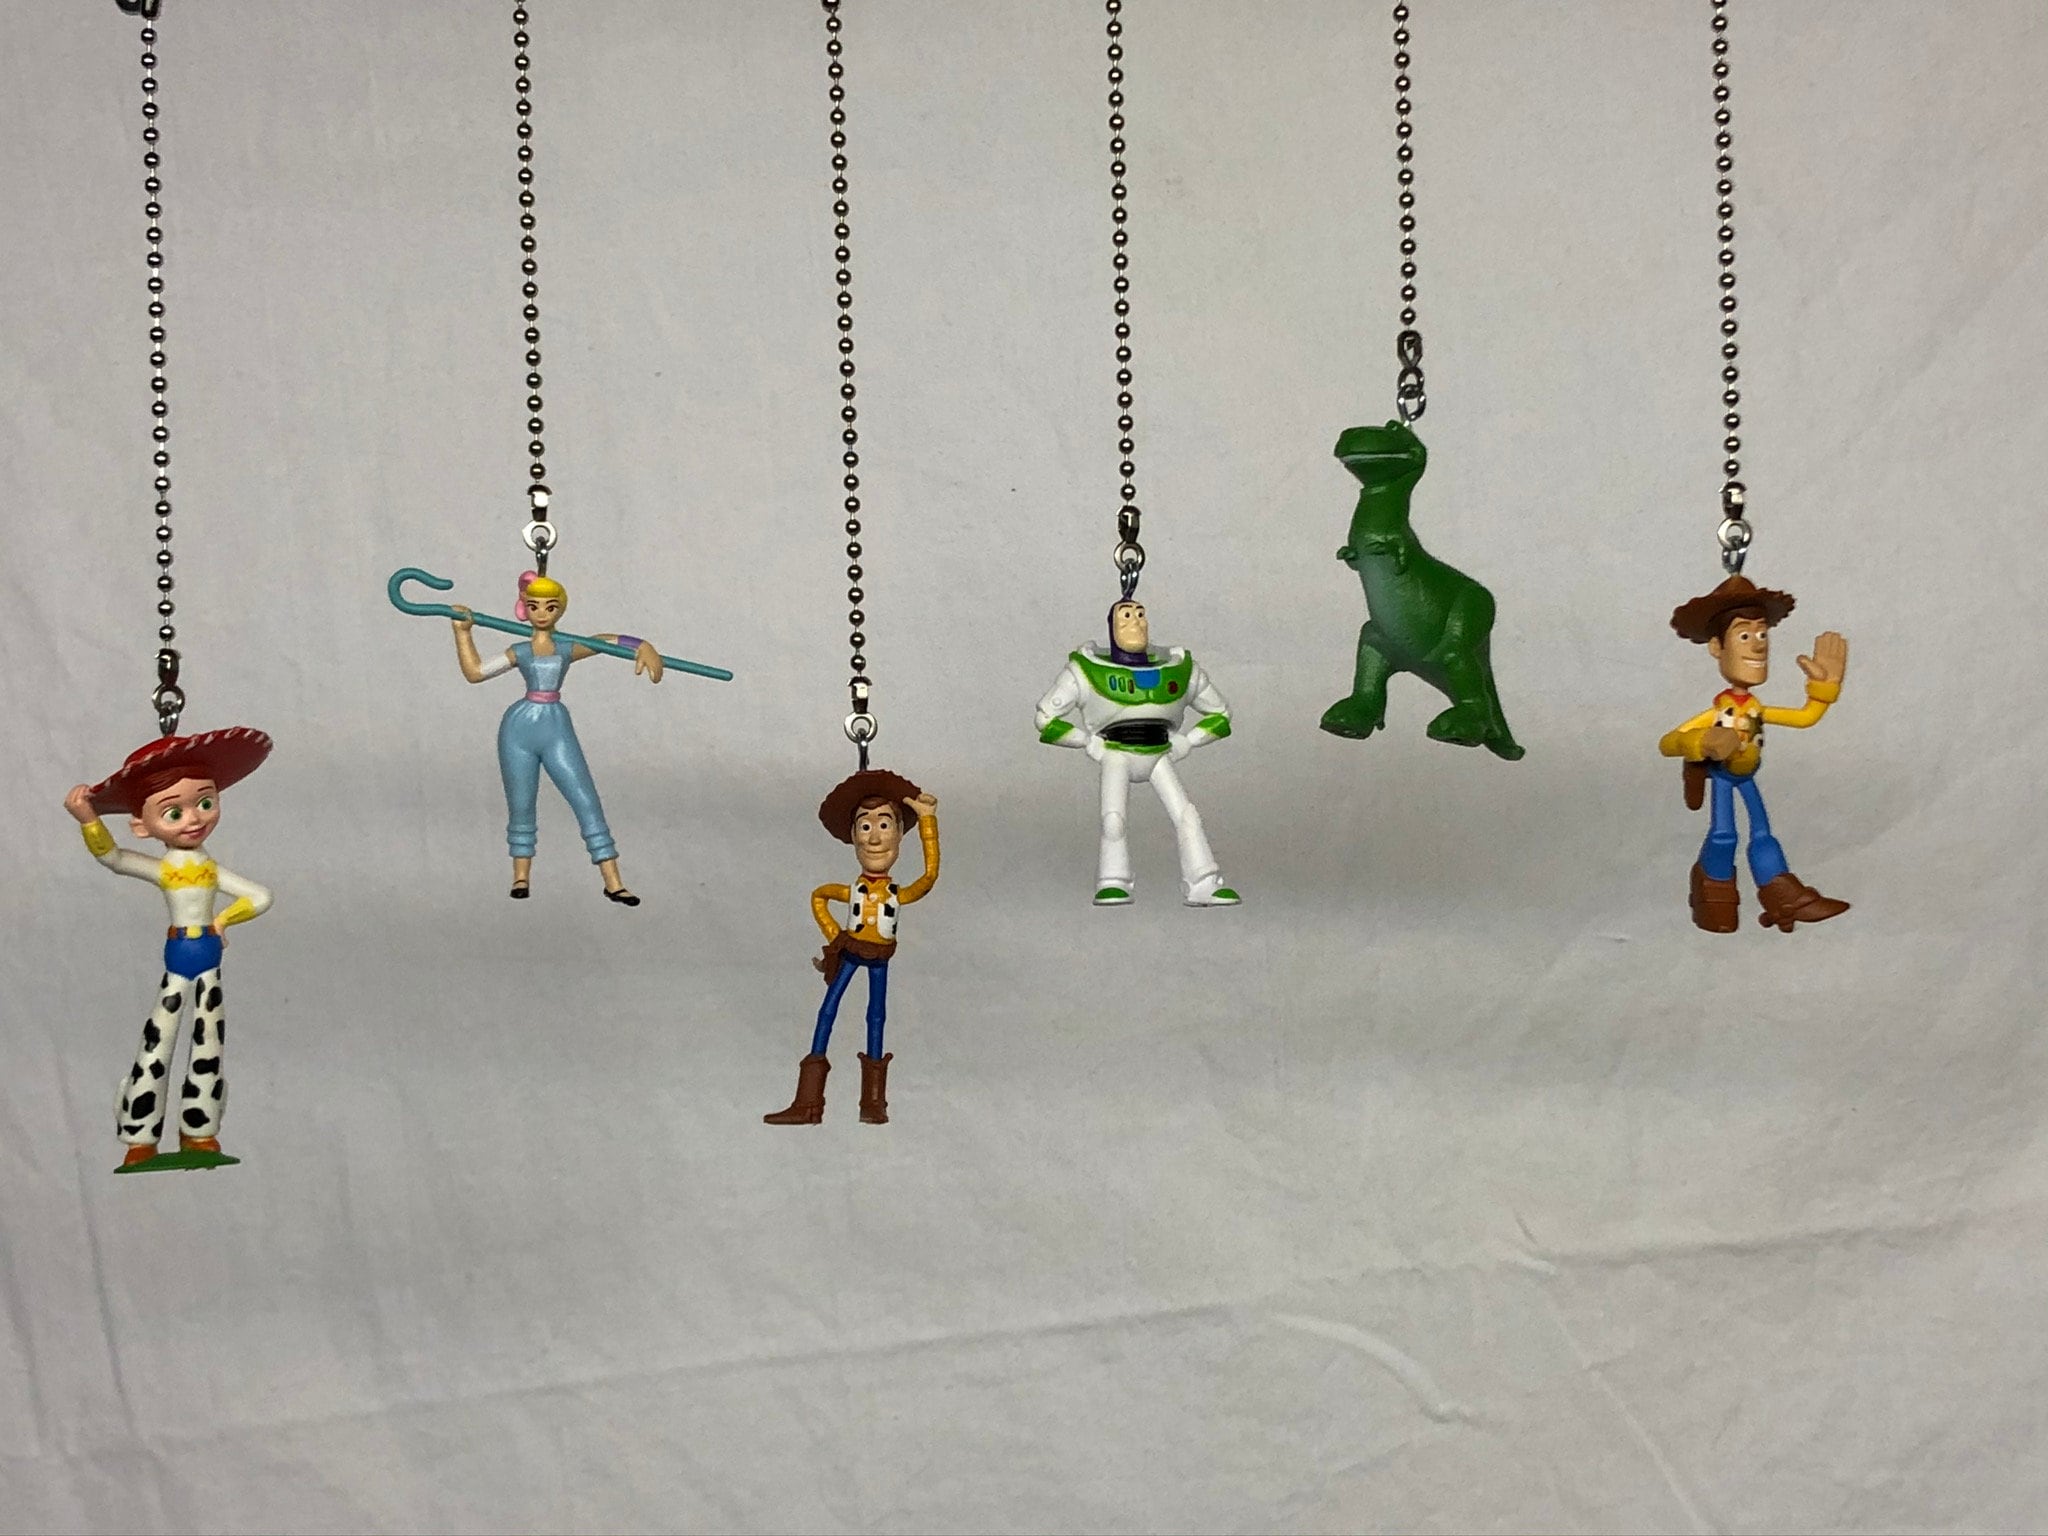 Why Woody Is the Worst Toy Story Character